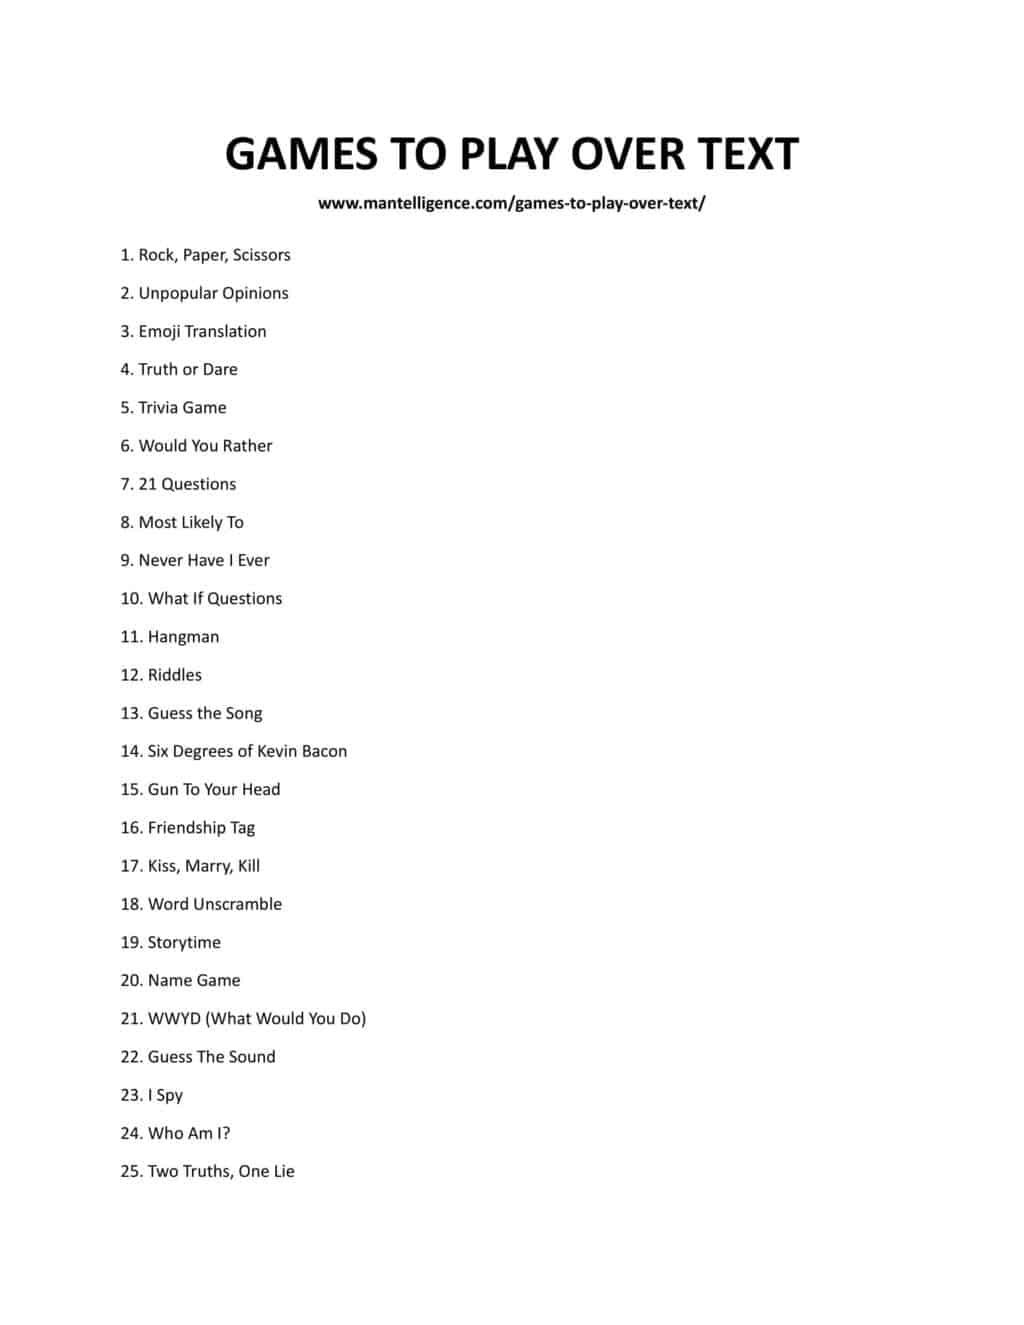 7 Text Games To Play With Your Long-Distance Partner